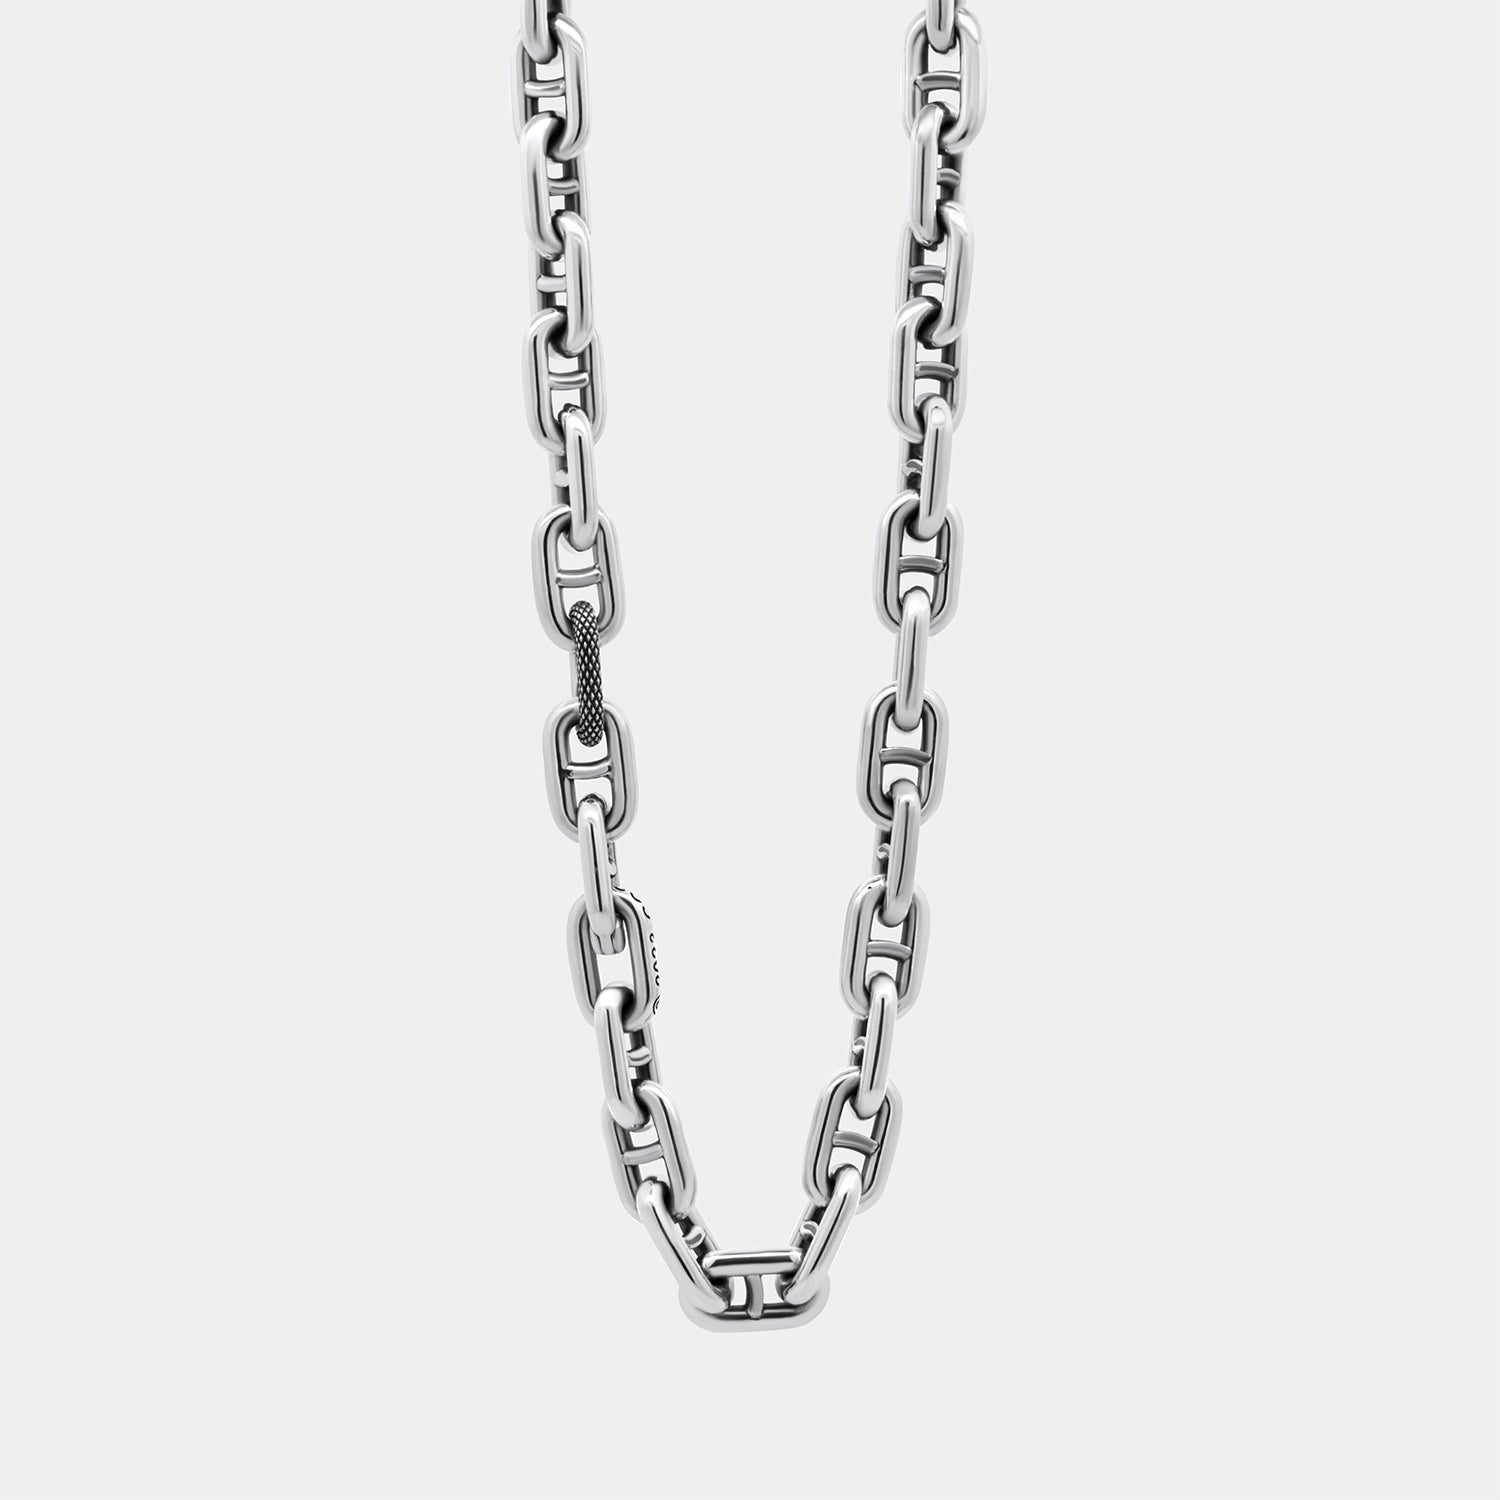 Model 22 Necklace - 2A